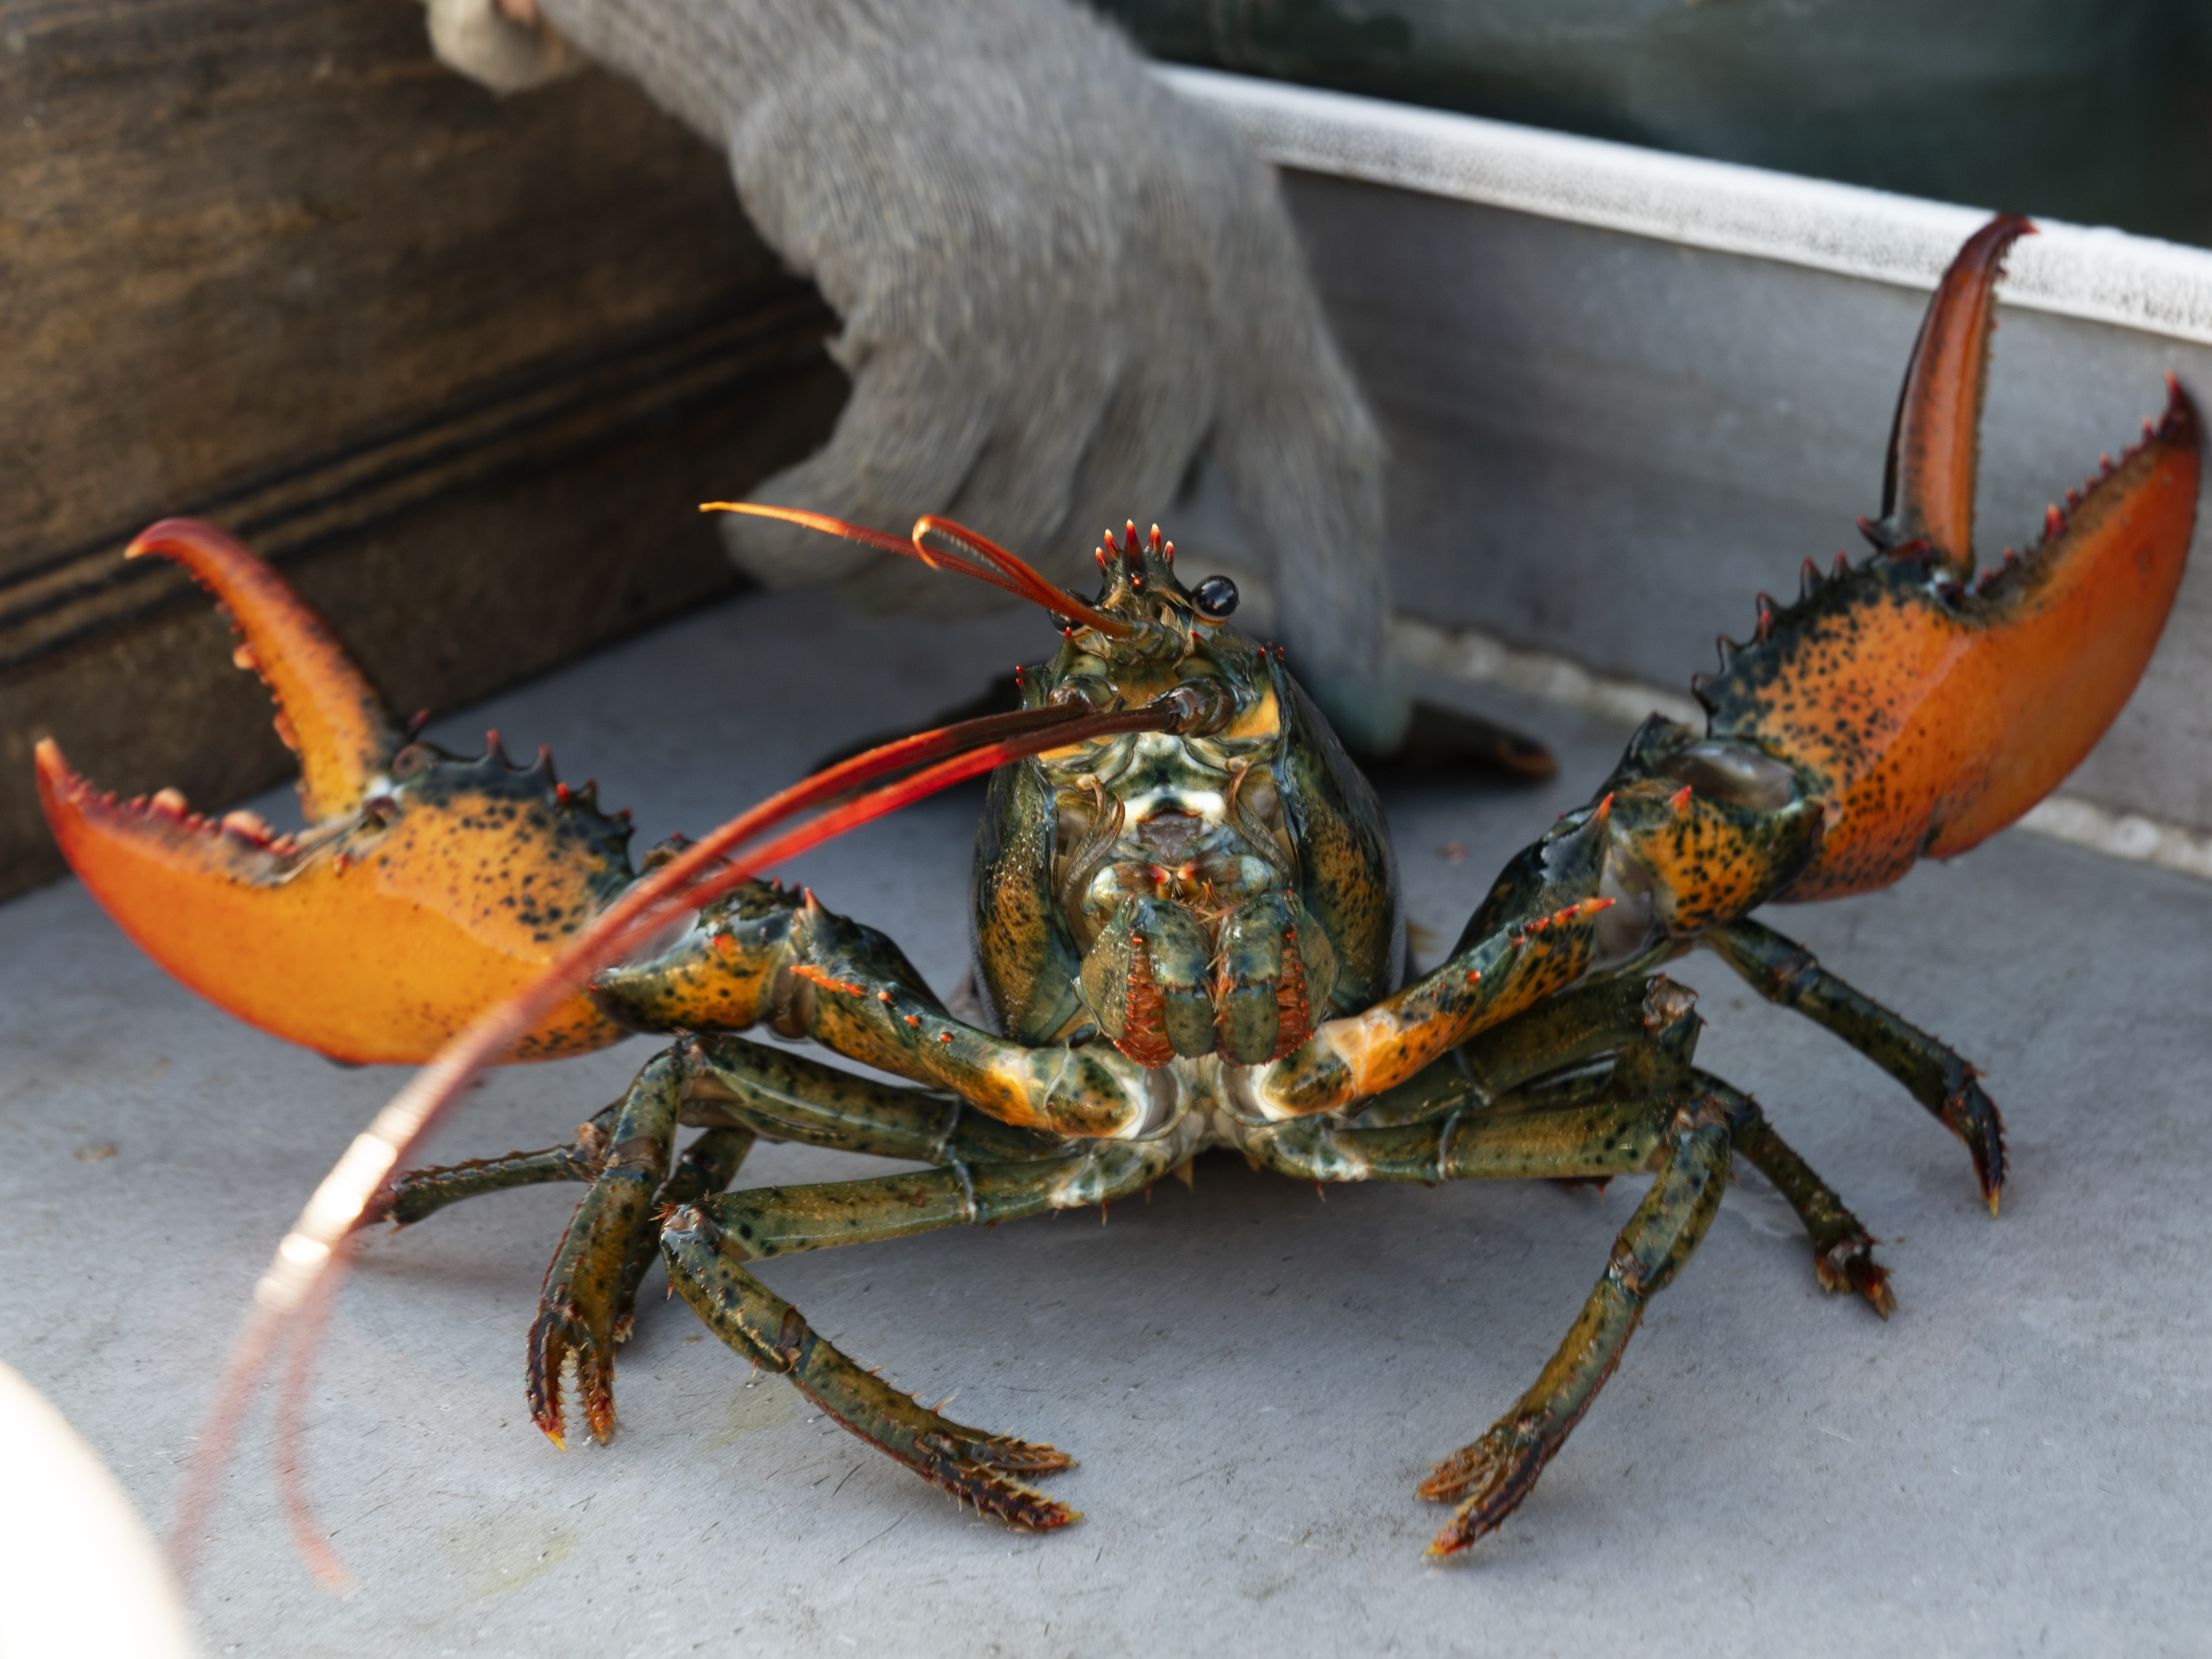 The Maine lobster industry sues California aquarium over a do-not-eat  listing - OPB